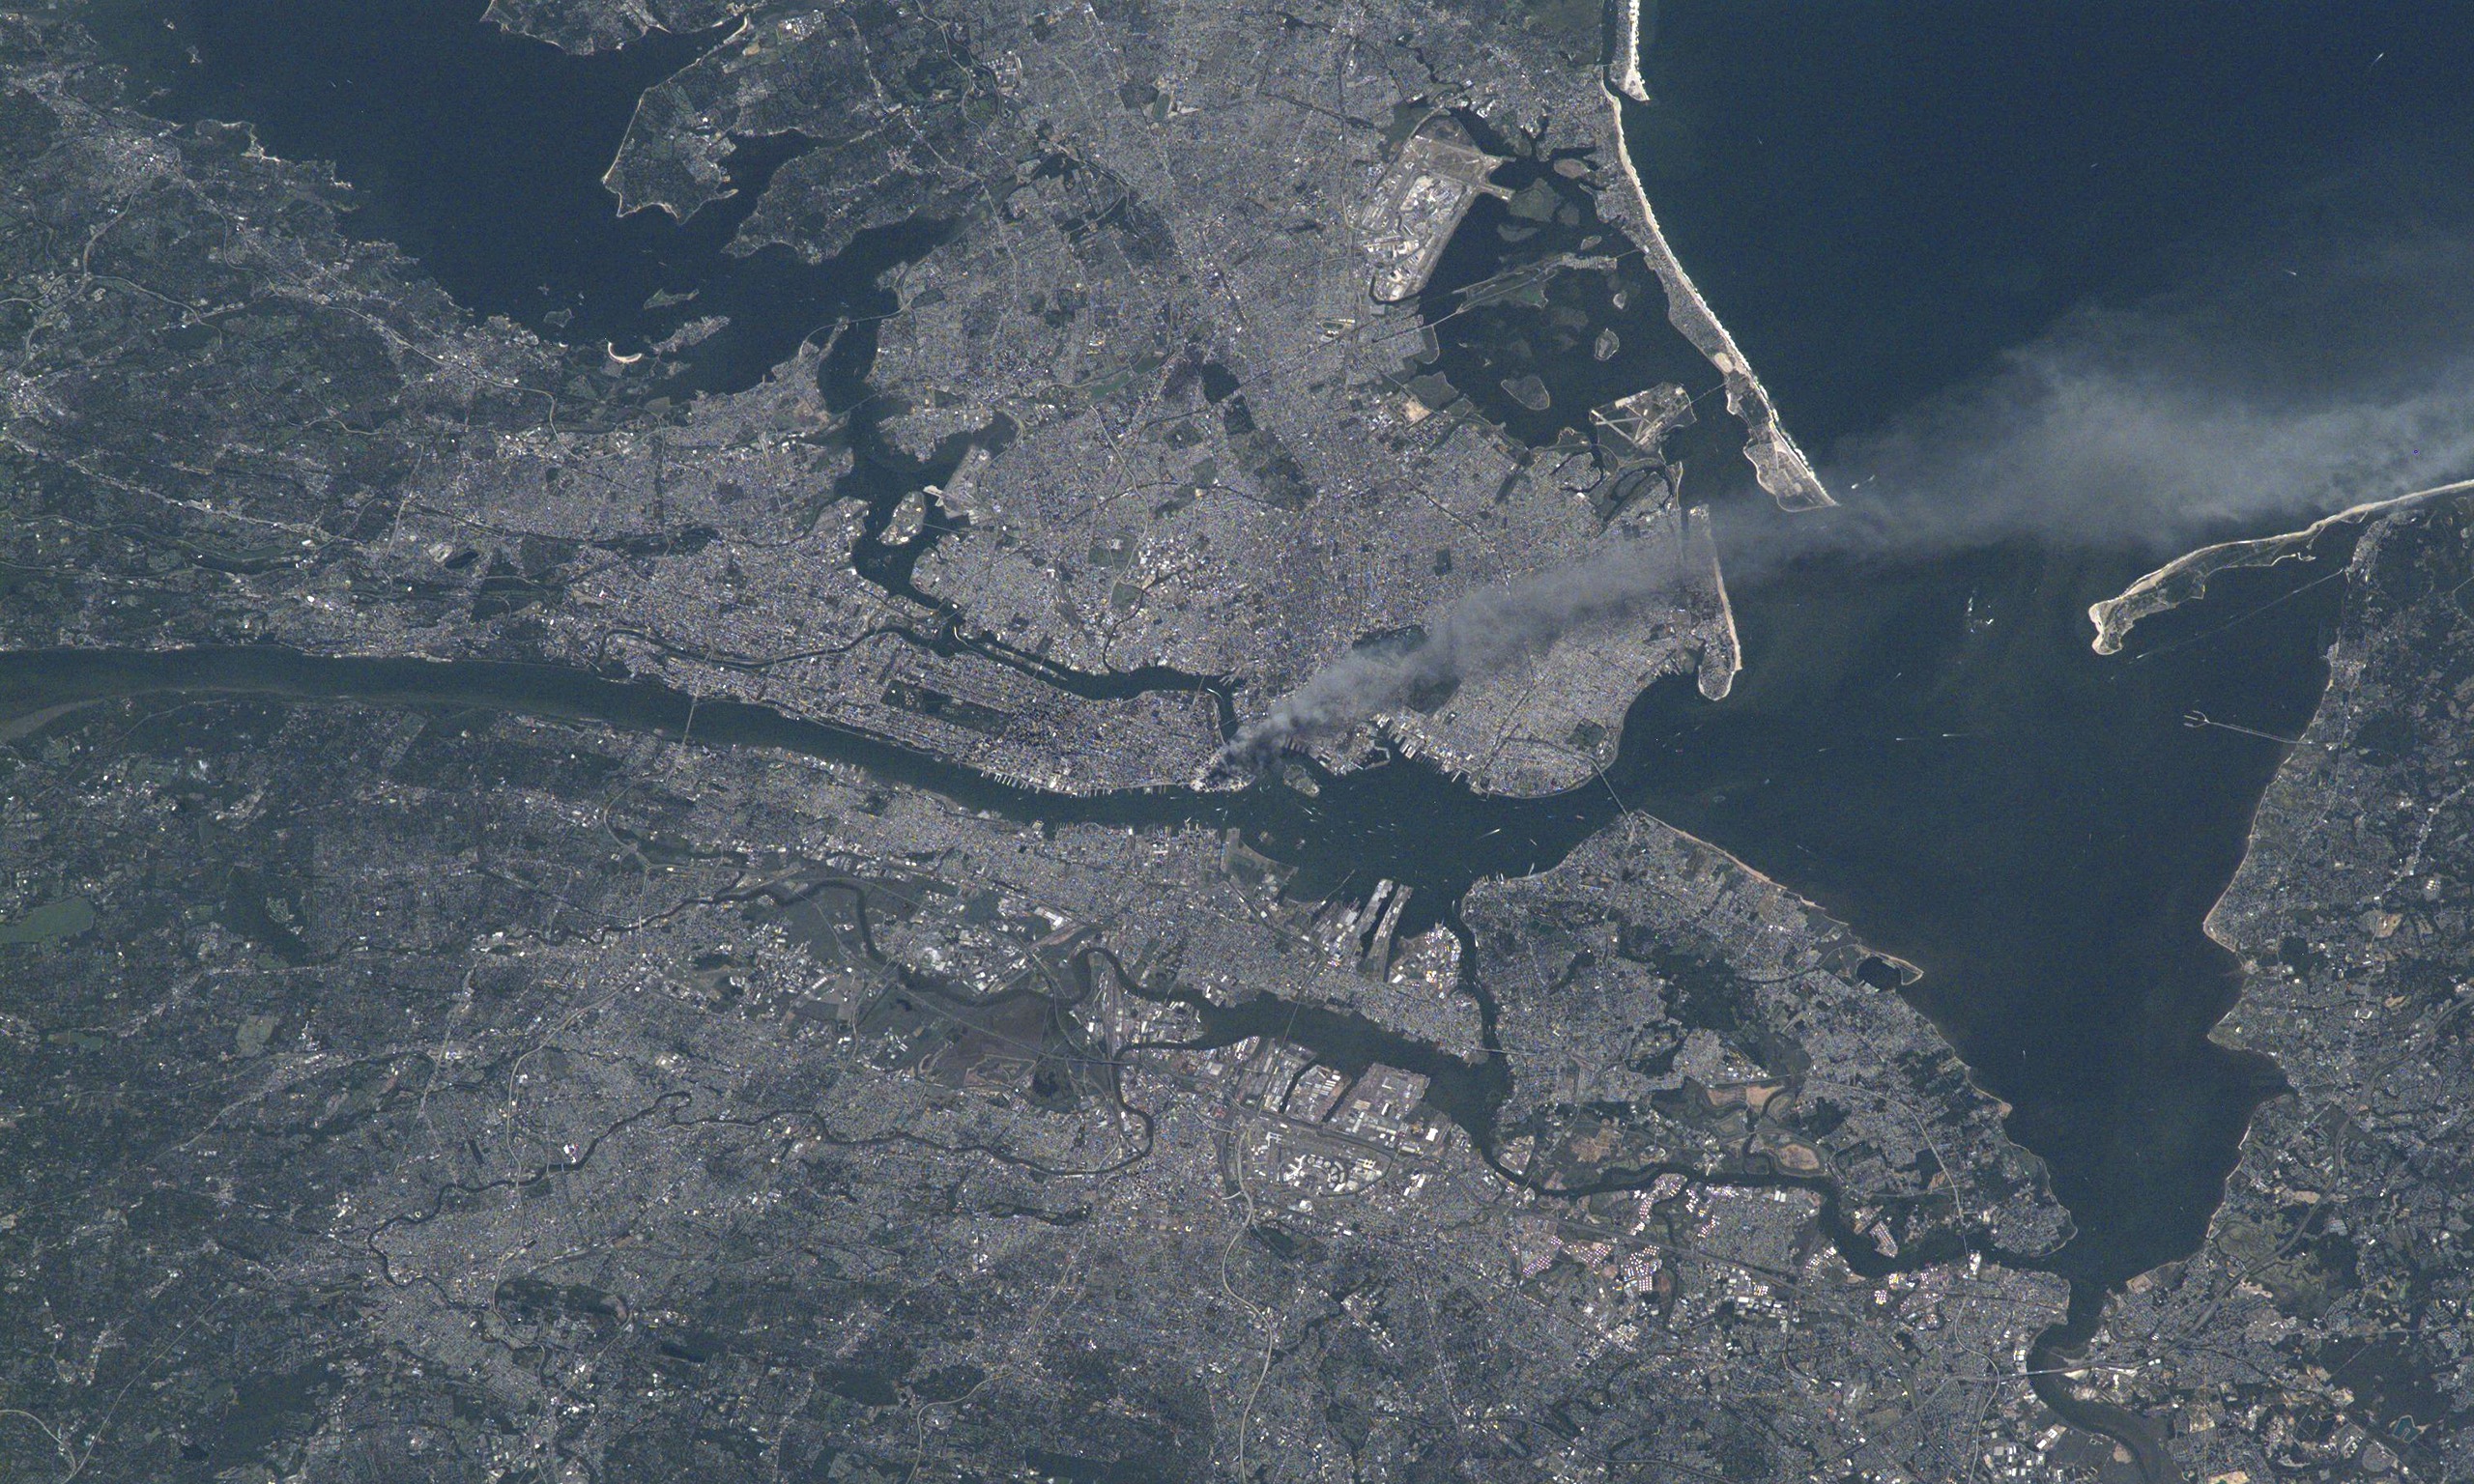 The 9 11 Attack Seen From Space An Image Of Impotence Jonathan